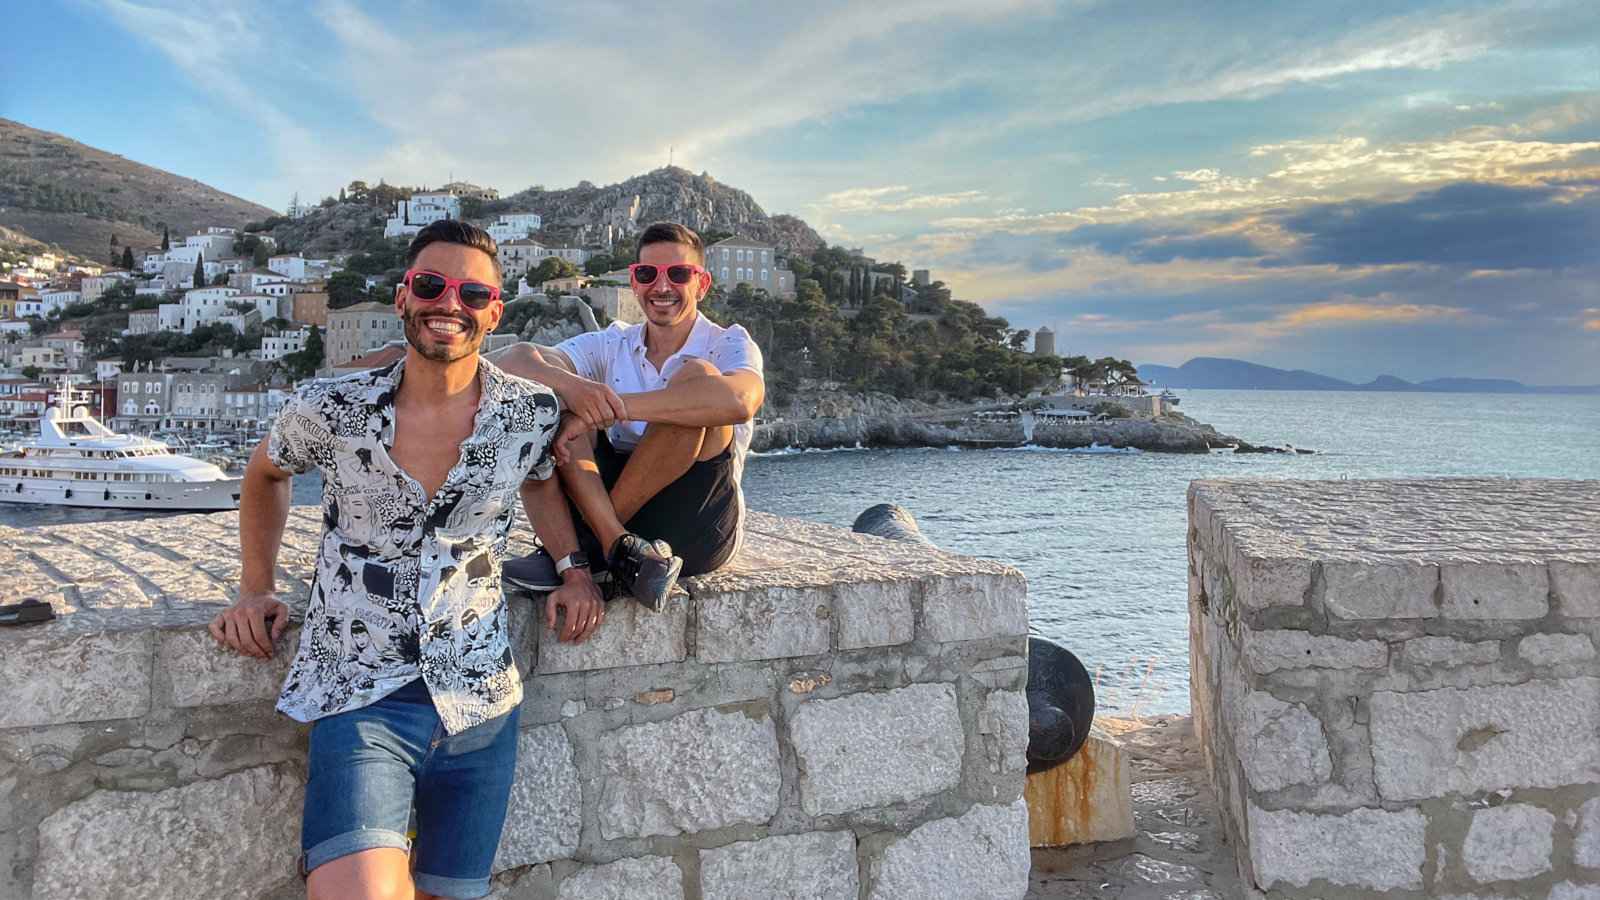 Two men in shorts, shirts, pink sunnies and cheesy grins posing on a stone wall in front of a beautiful bay and harbour town.